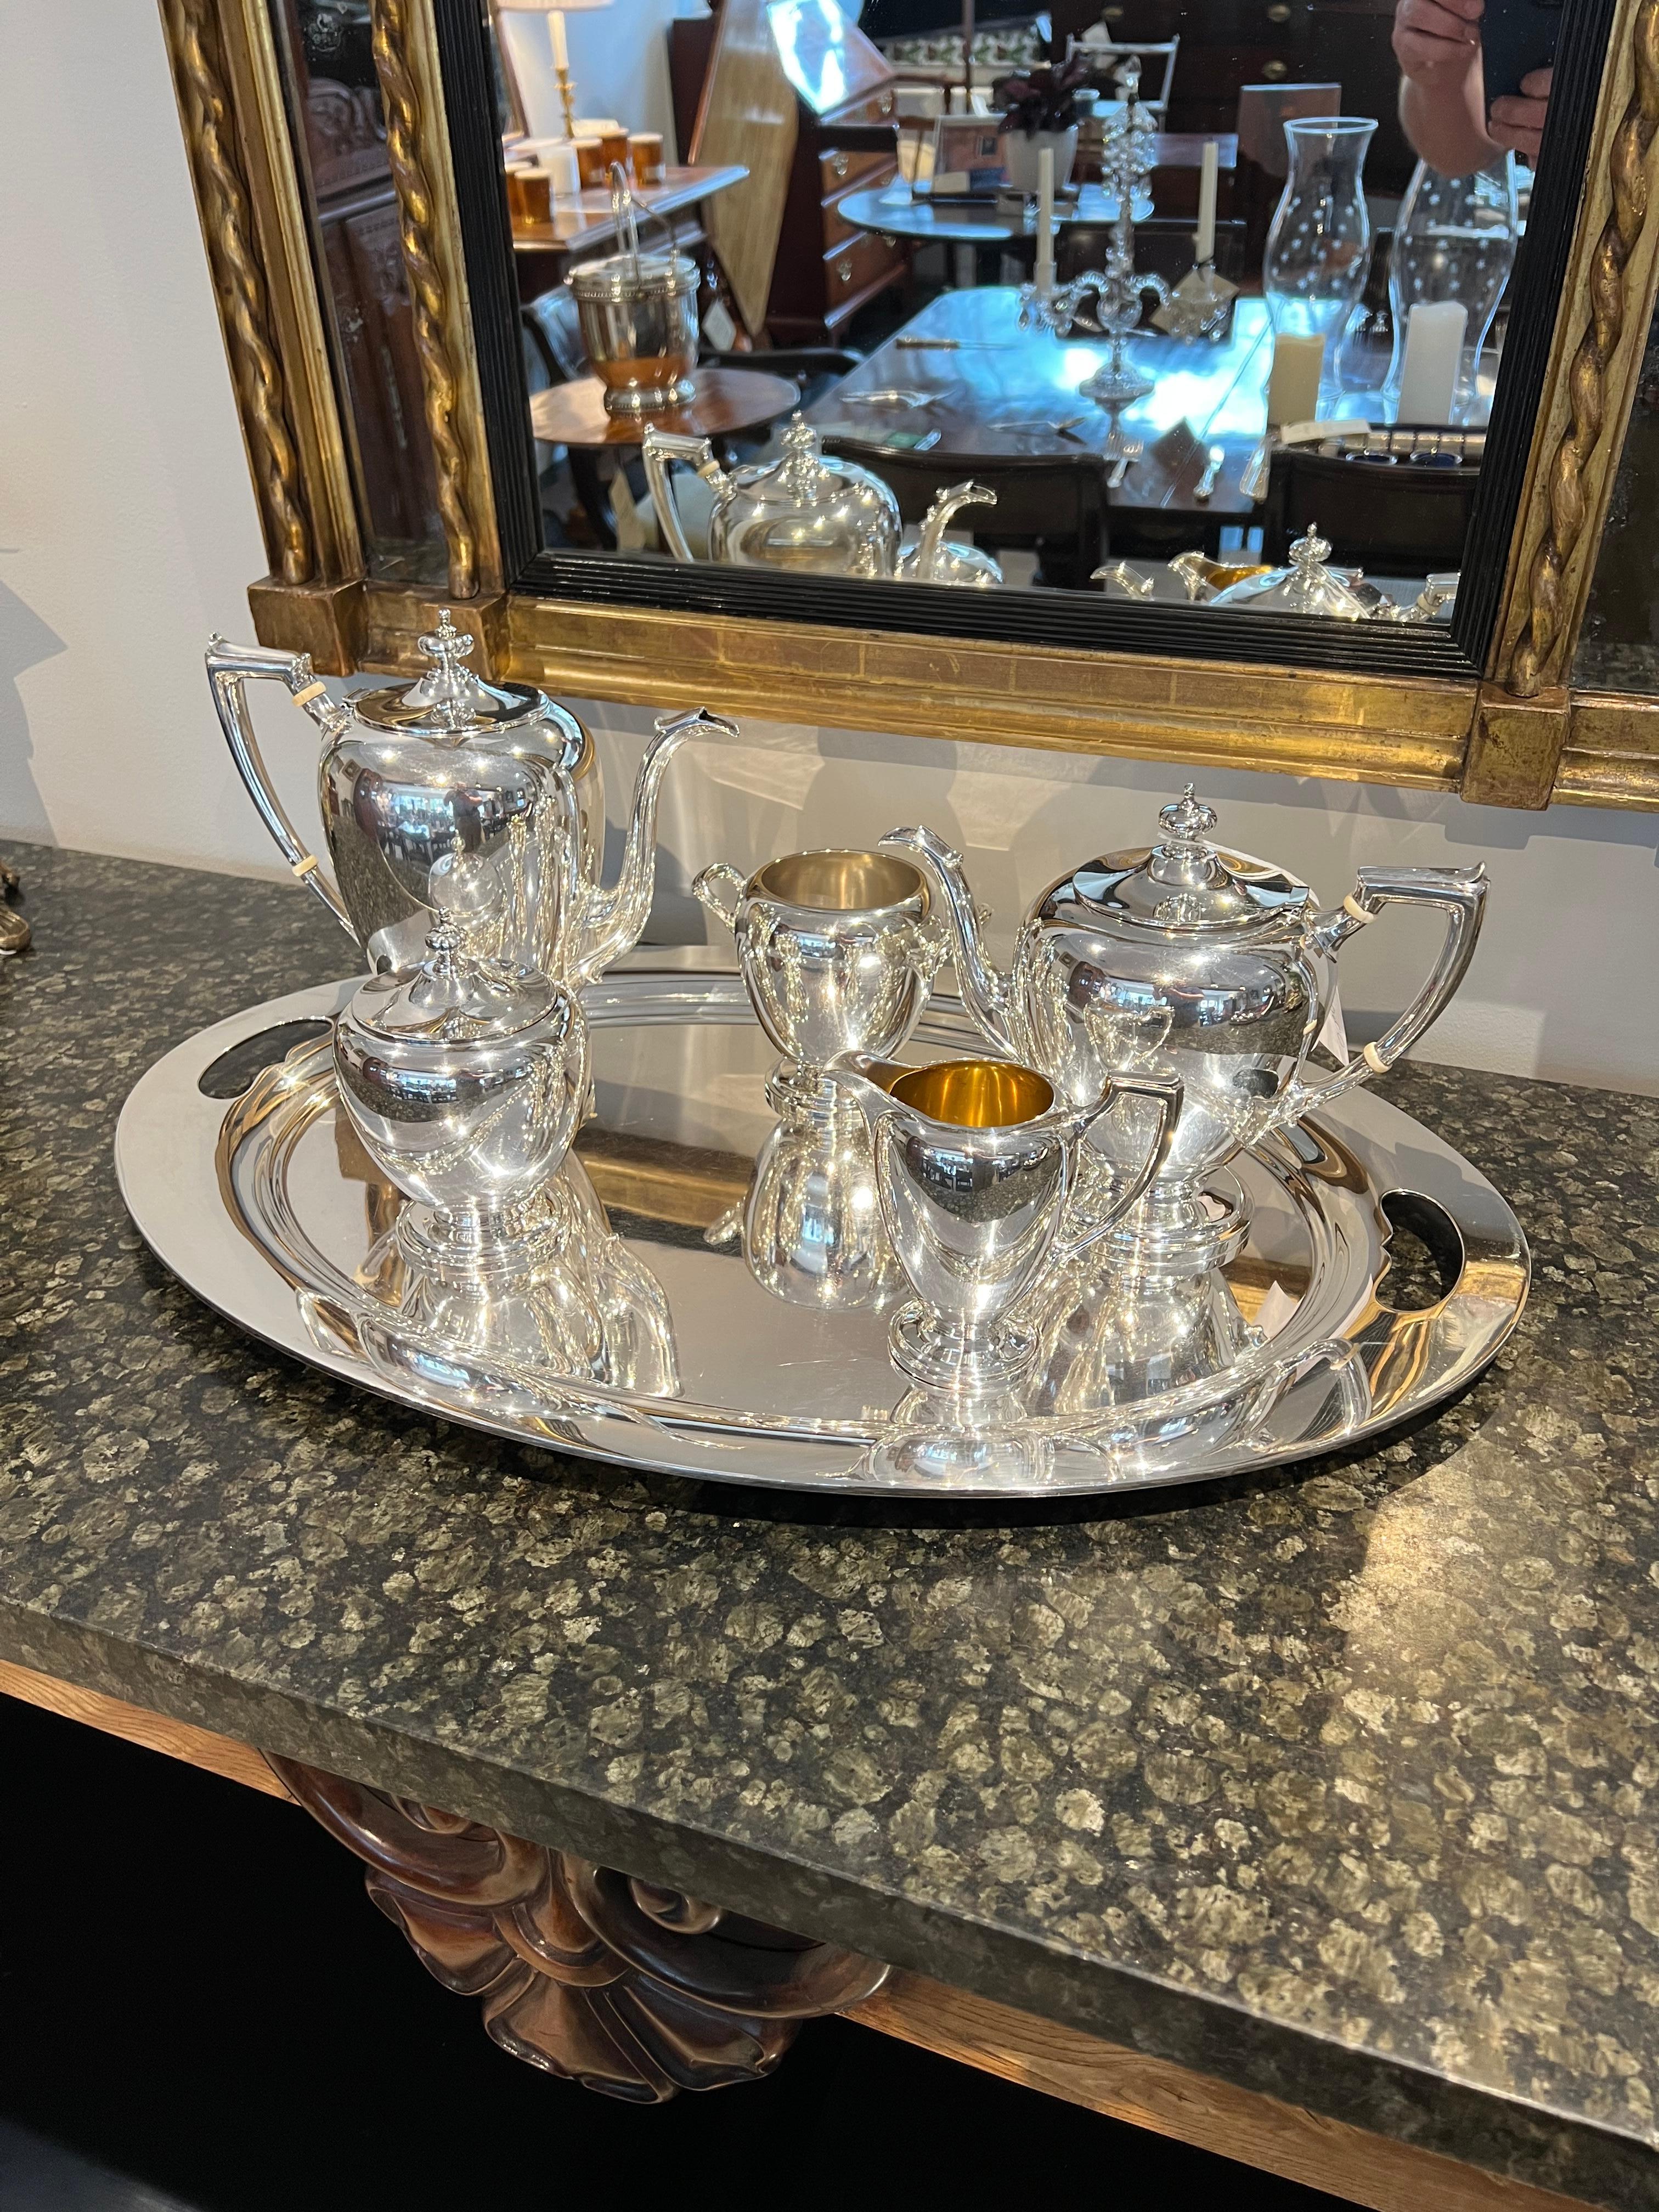 19th Century Dominick & Haff Sterling Silver Coffee And Tea Service with Tray circa 1895